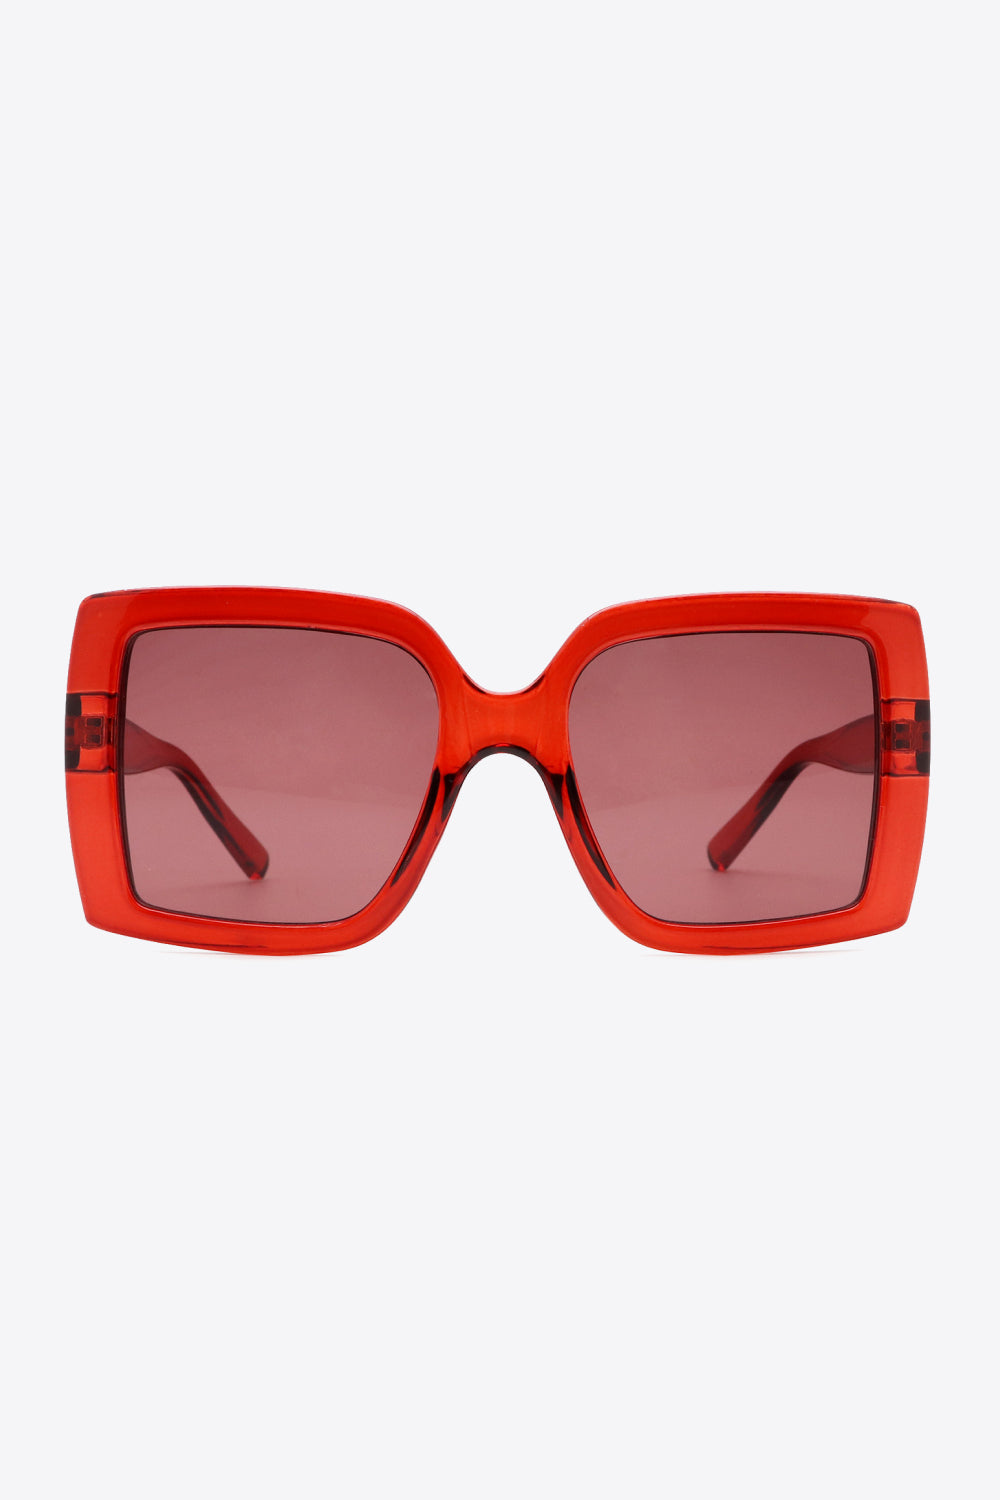 Acetate Lens Square Sunglasses Print on any thing USA/STOD clothes